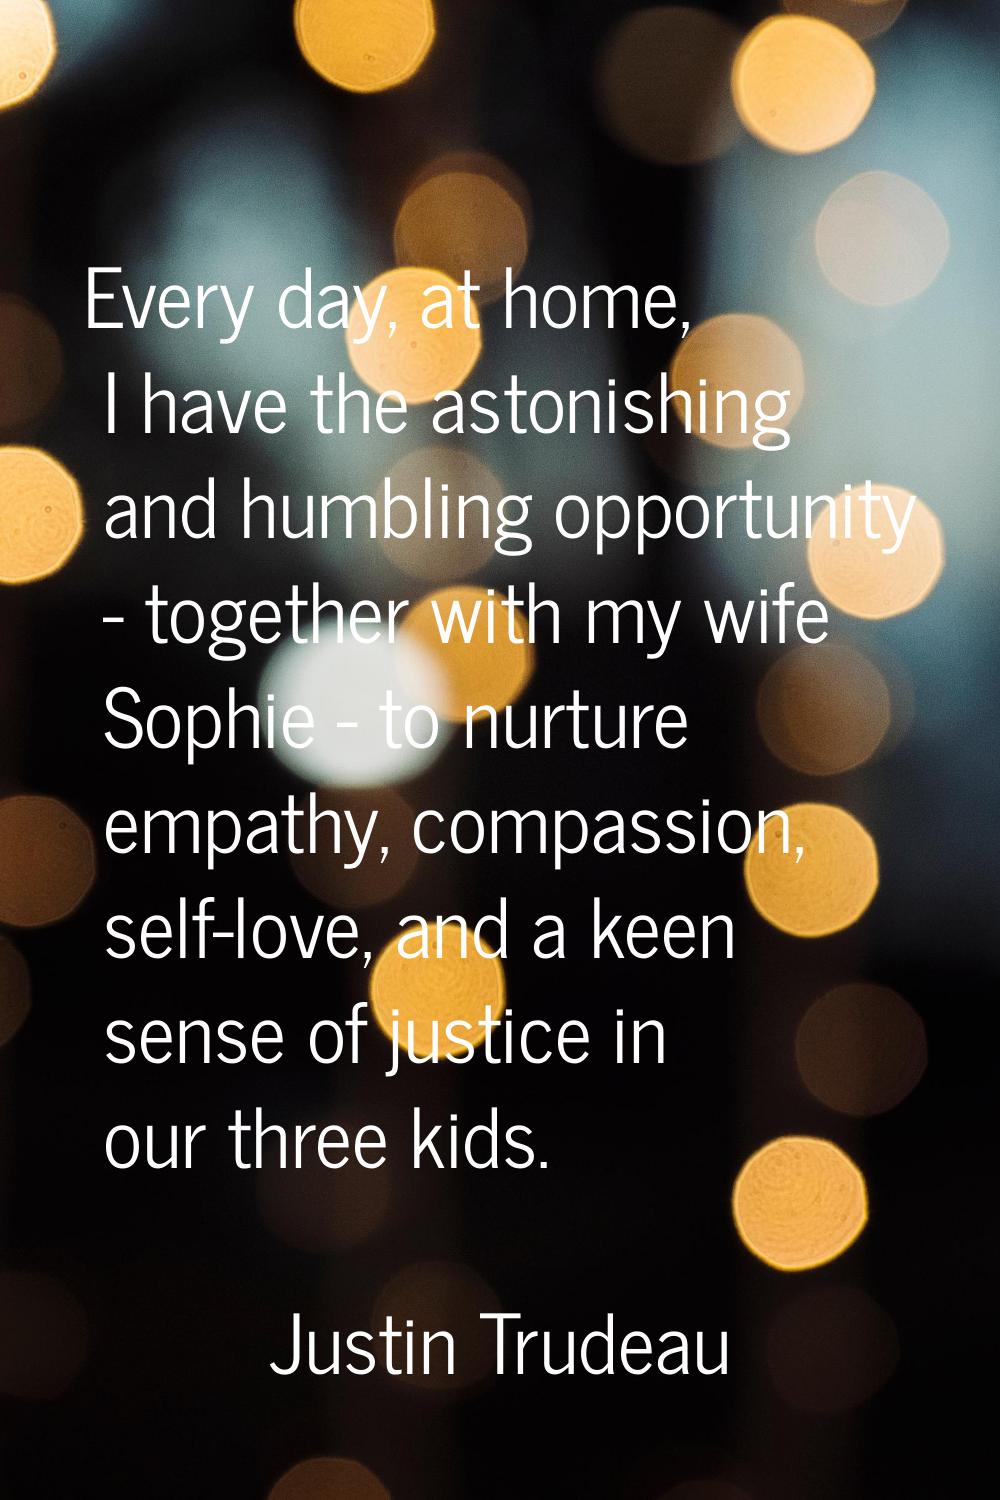 Every day, at home, I have the astonishing and humbling opportunity - together with my wife Sophie 